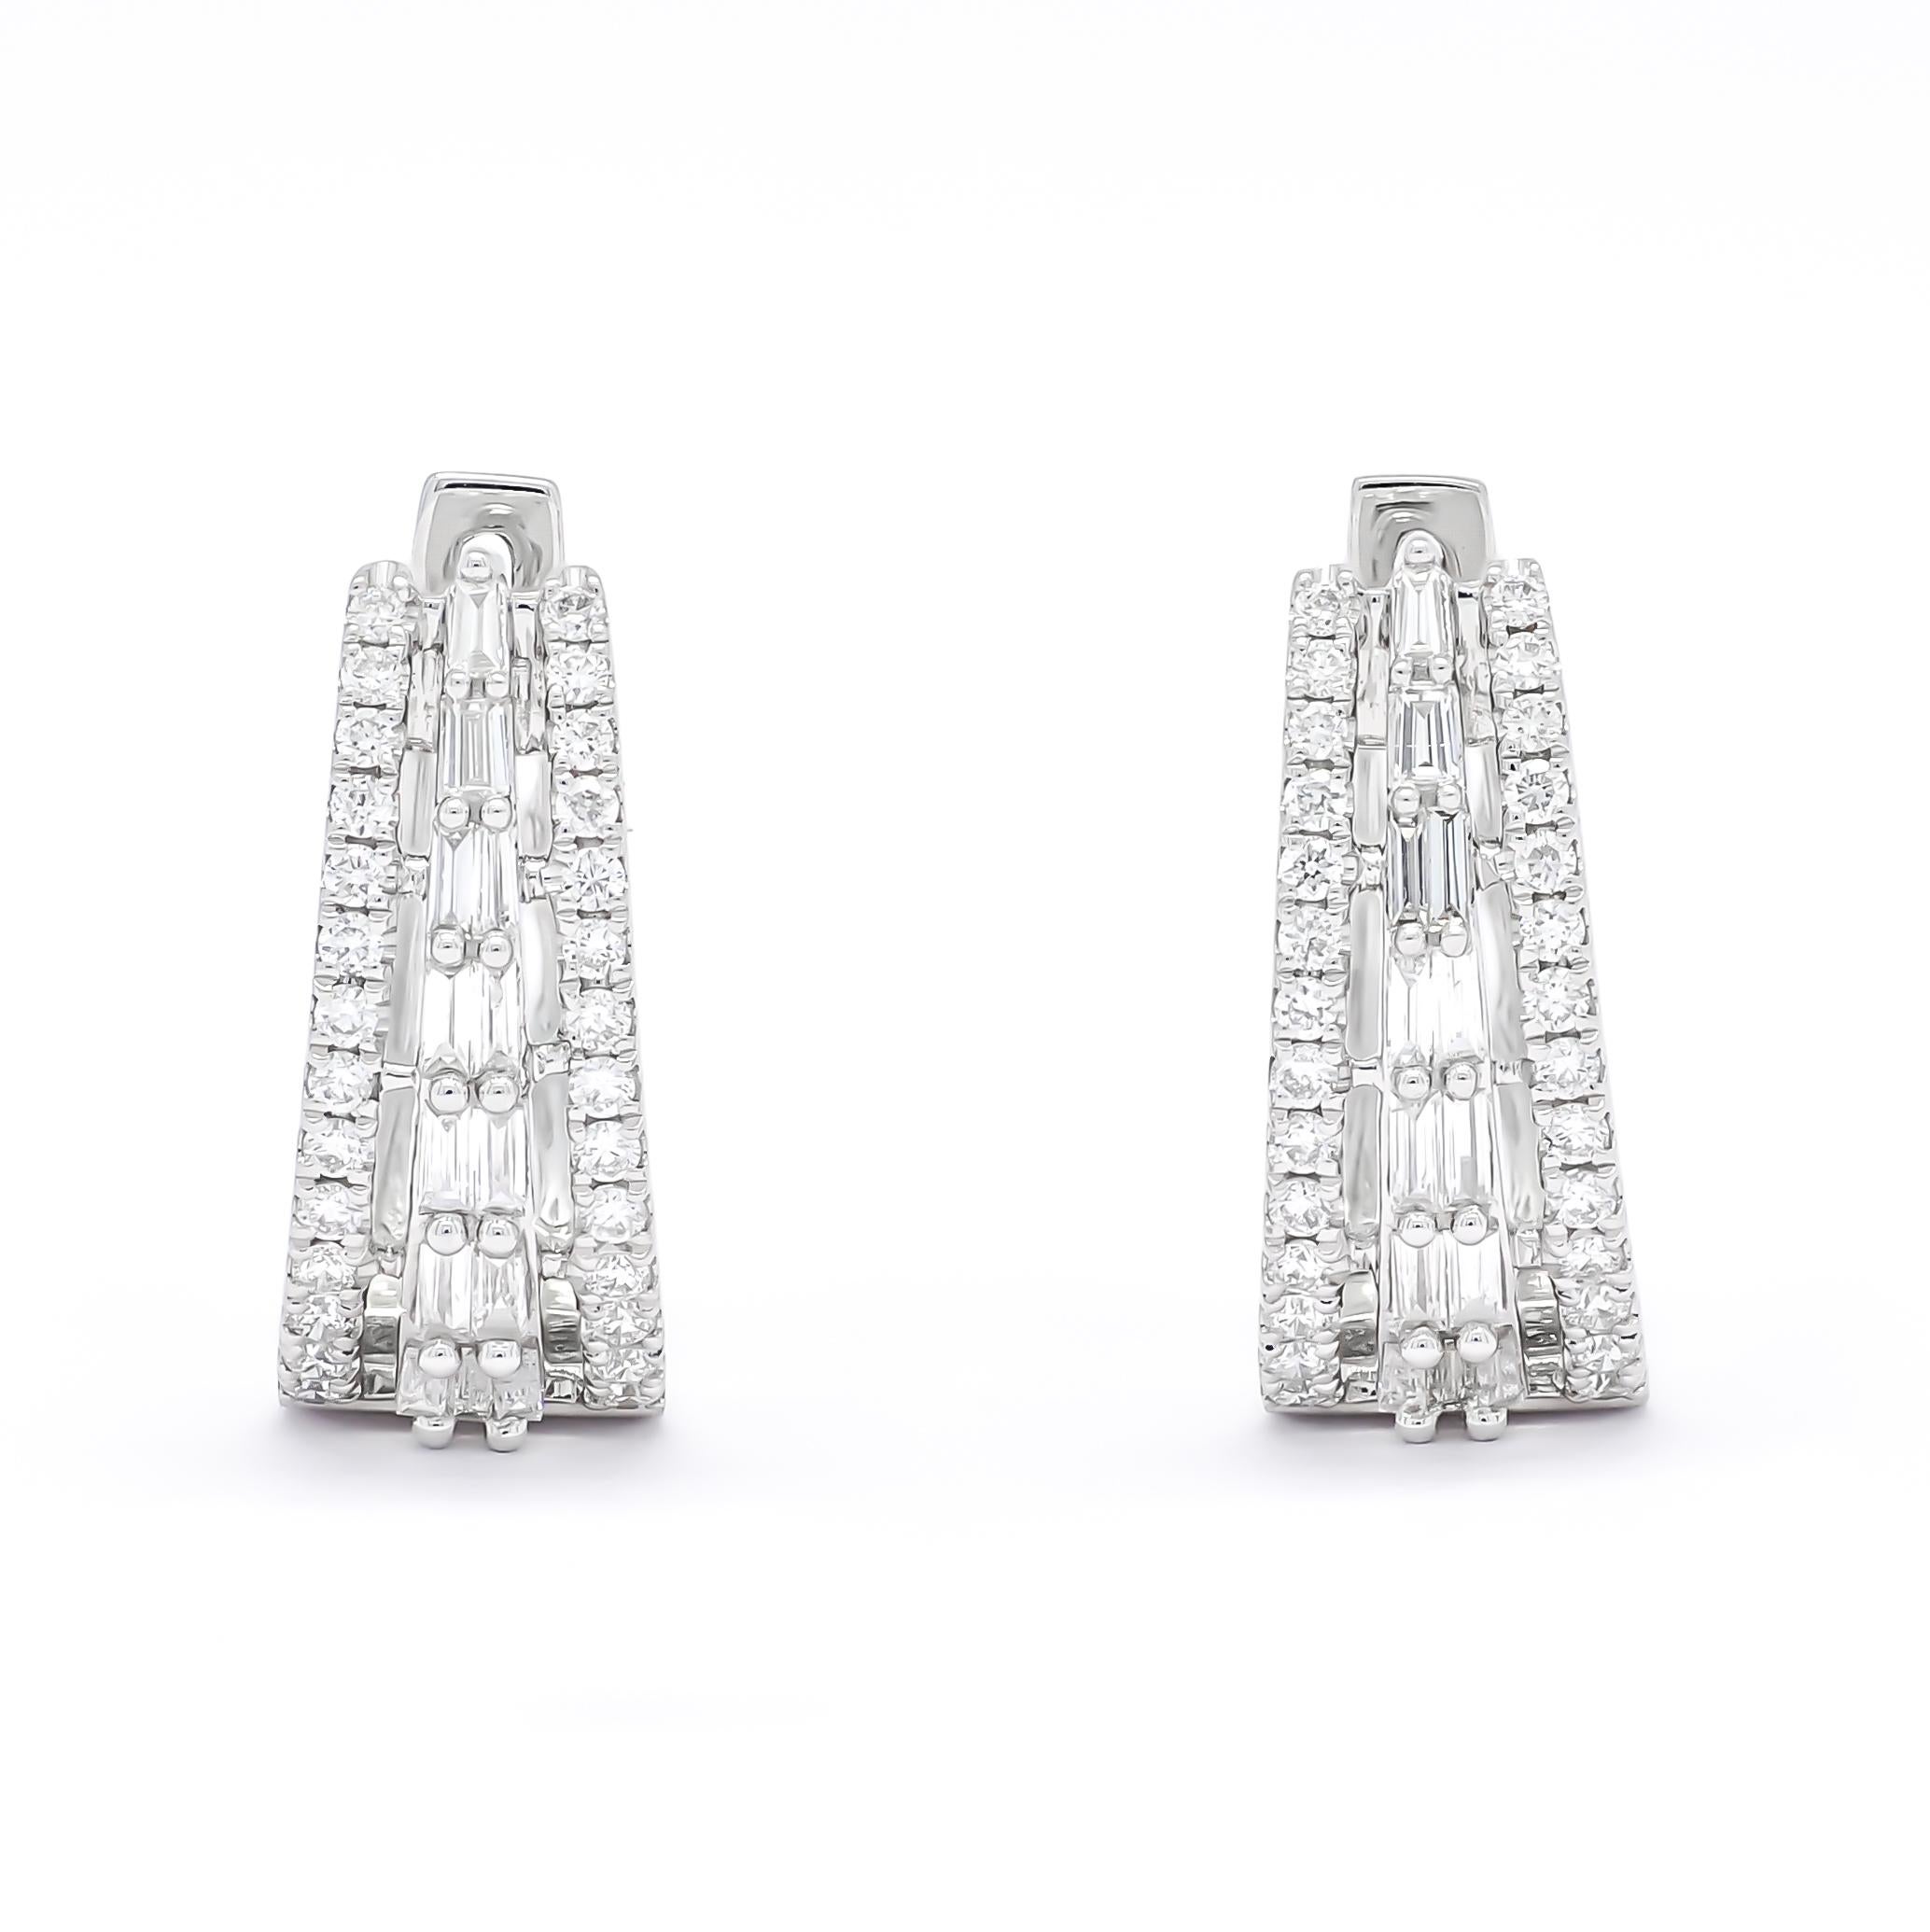 Elevate your style with sophistication and grace wearing these exquisite hoop earrings, adorned with brilliant baguette and shimmering round-cut diamonds set in gleaming 18 KT White Gold.

Totaling 0.74 carats, the diamonds in these designer hoops